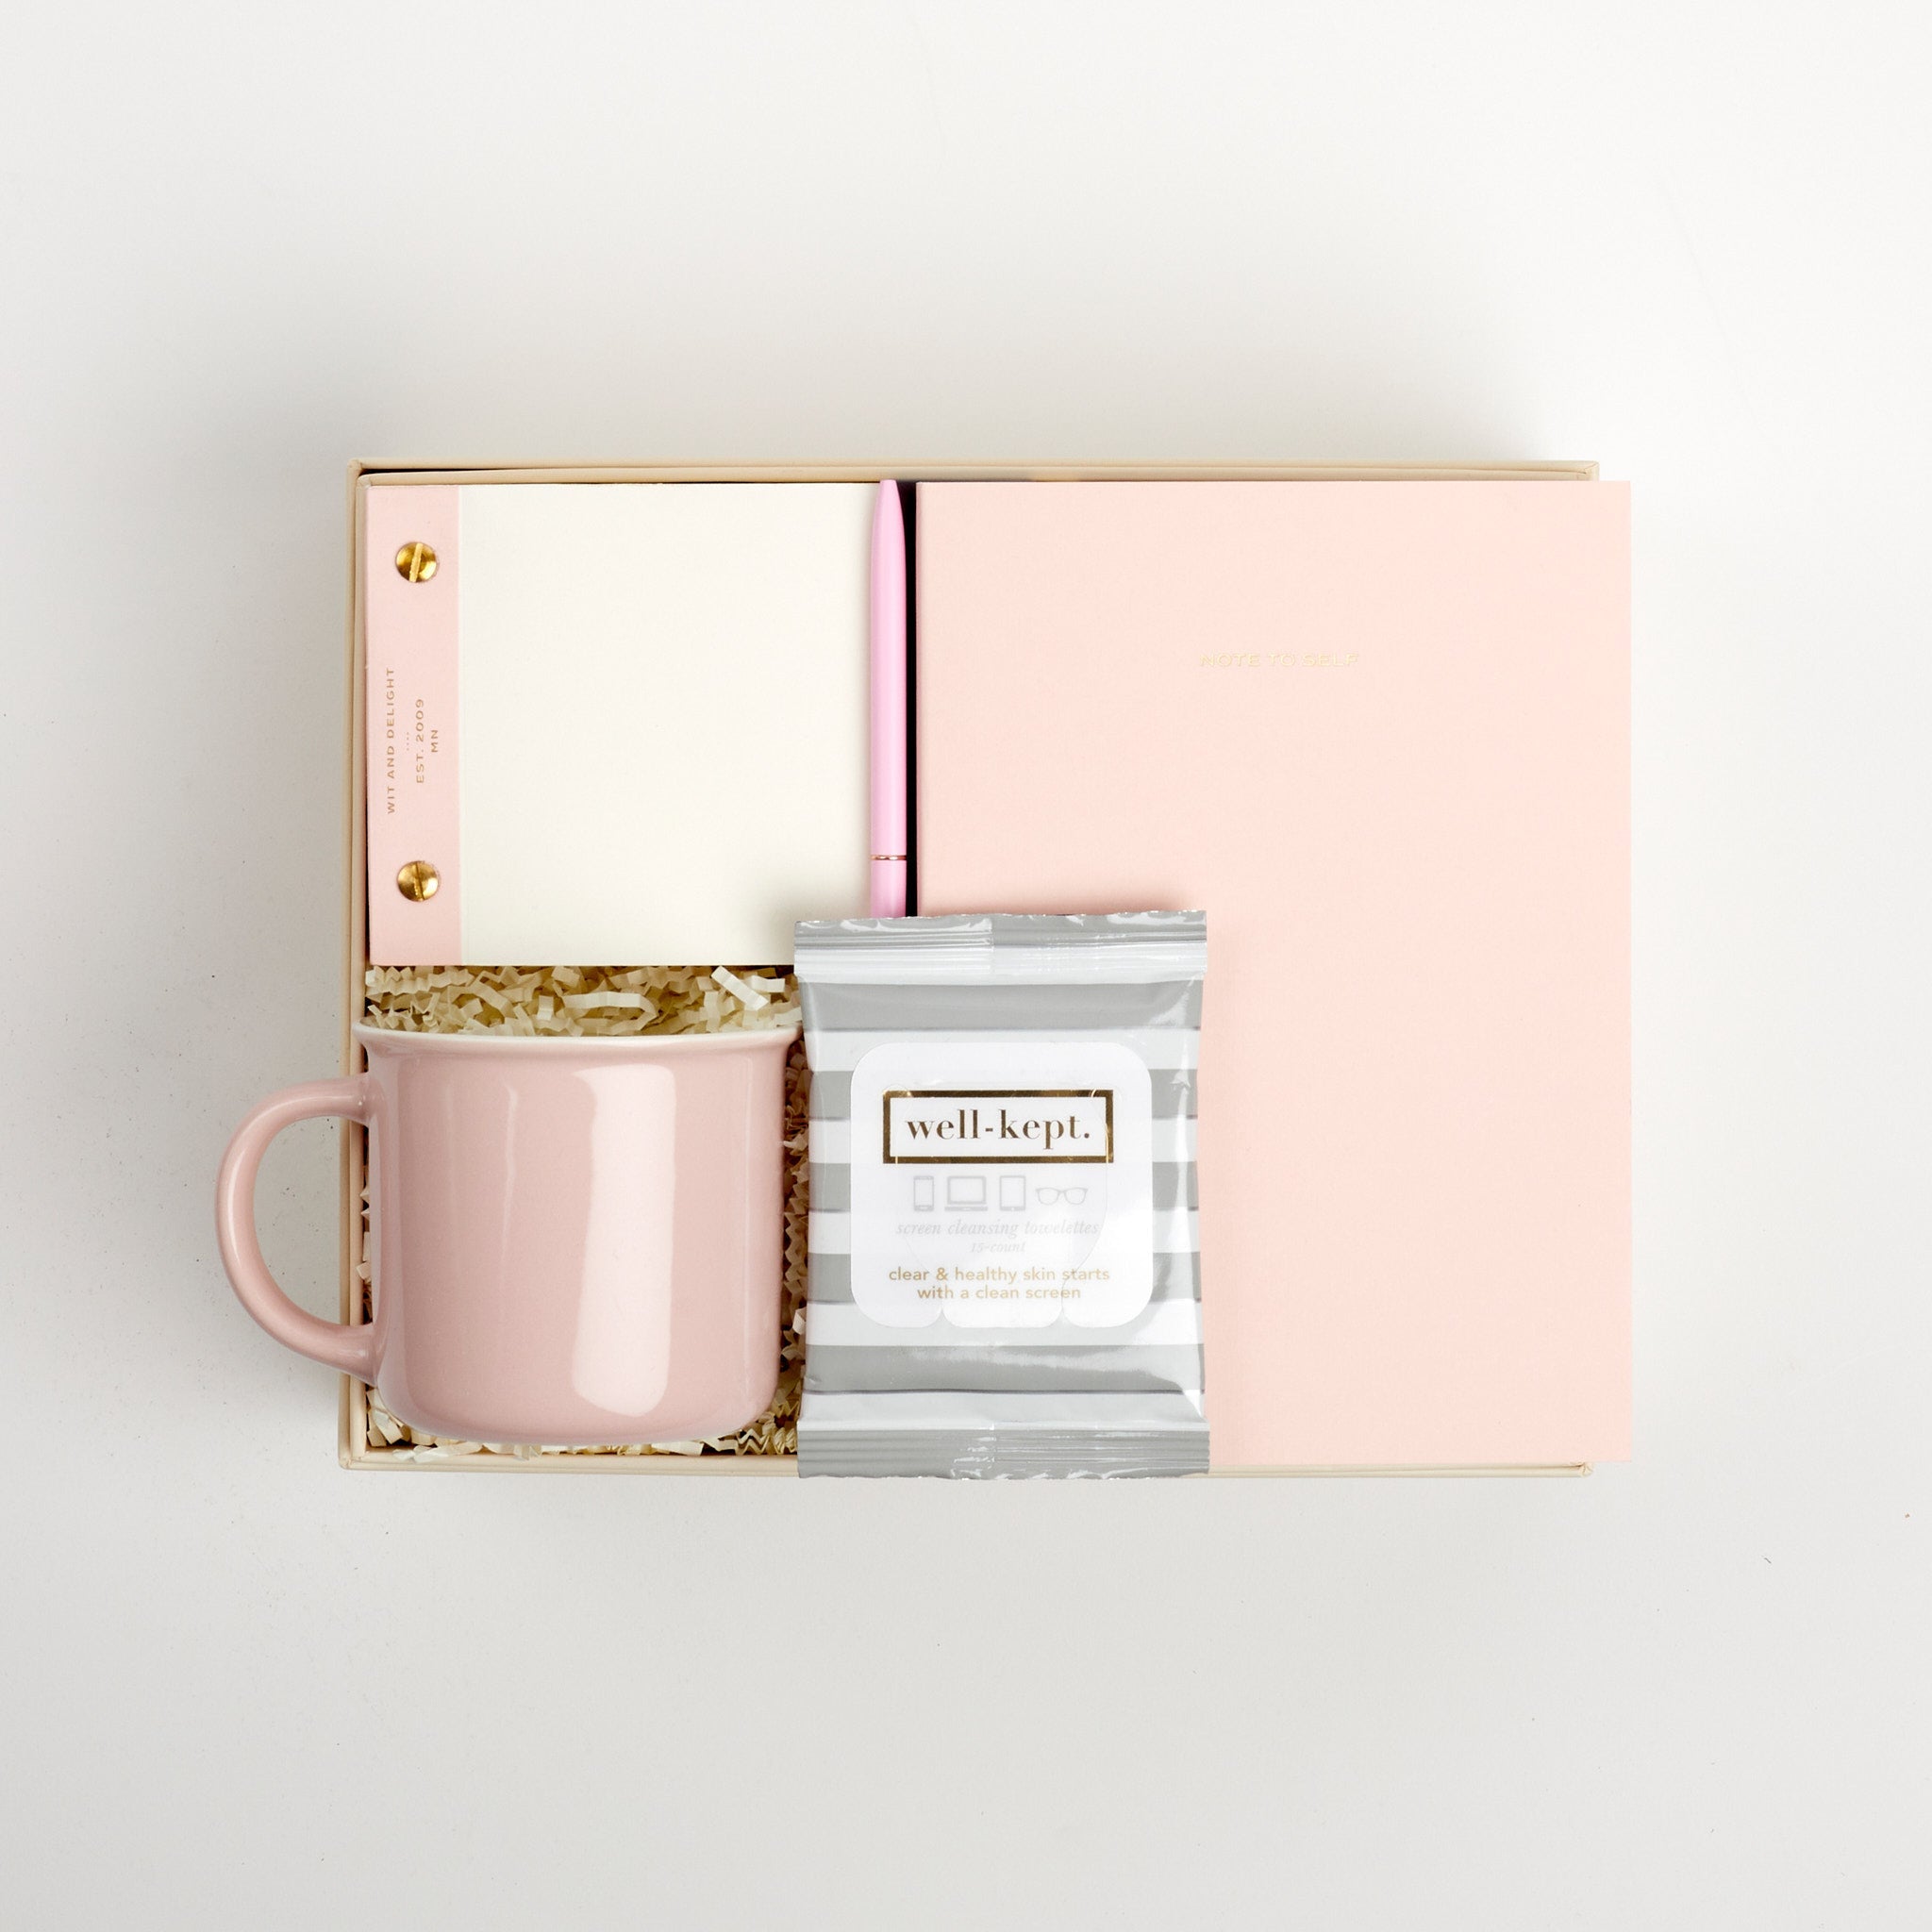 BOXFOX Original Creme Hustle Gift Box packed with Wit &amp; Delight Pink Note to Self Journal, BOXFOX Pink Ceramic Mug, Well-Kept Hampton Tech Wipes, Sugarpaper Pink To Do Pad, and BOXFOX Pink Bullet Pen.